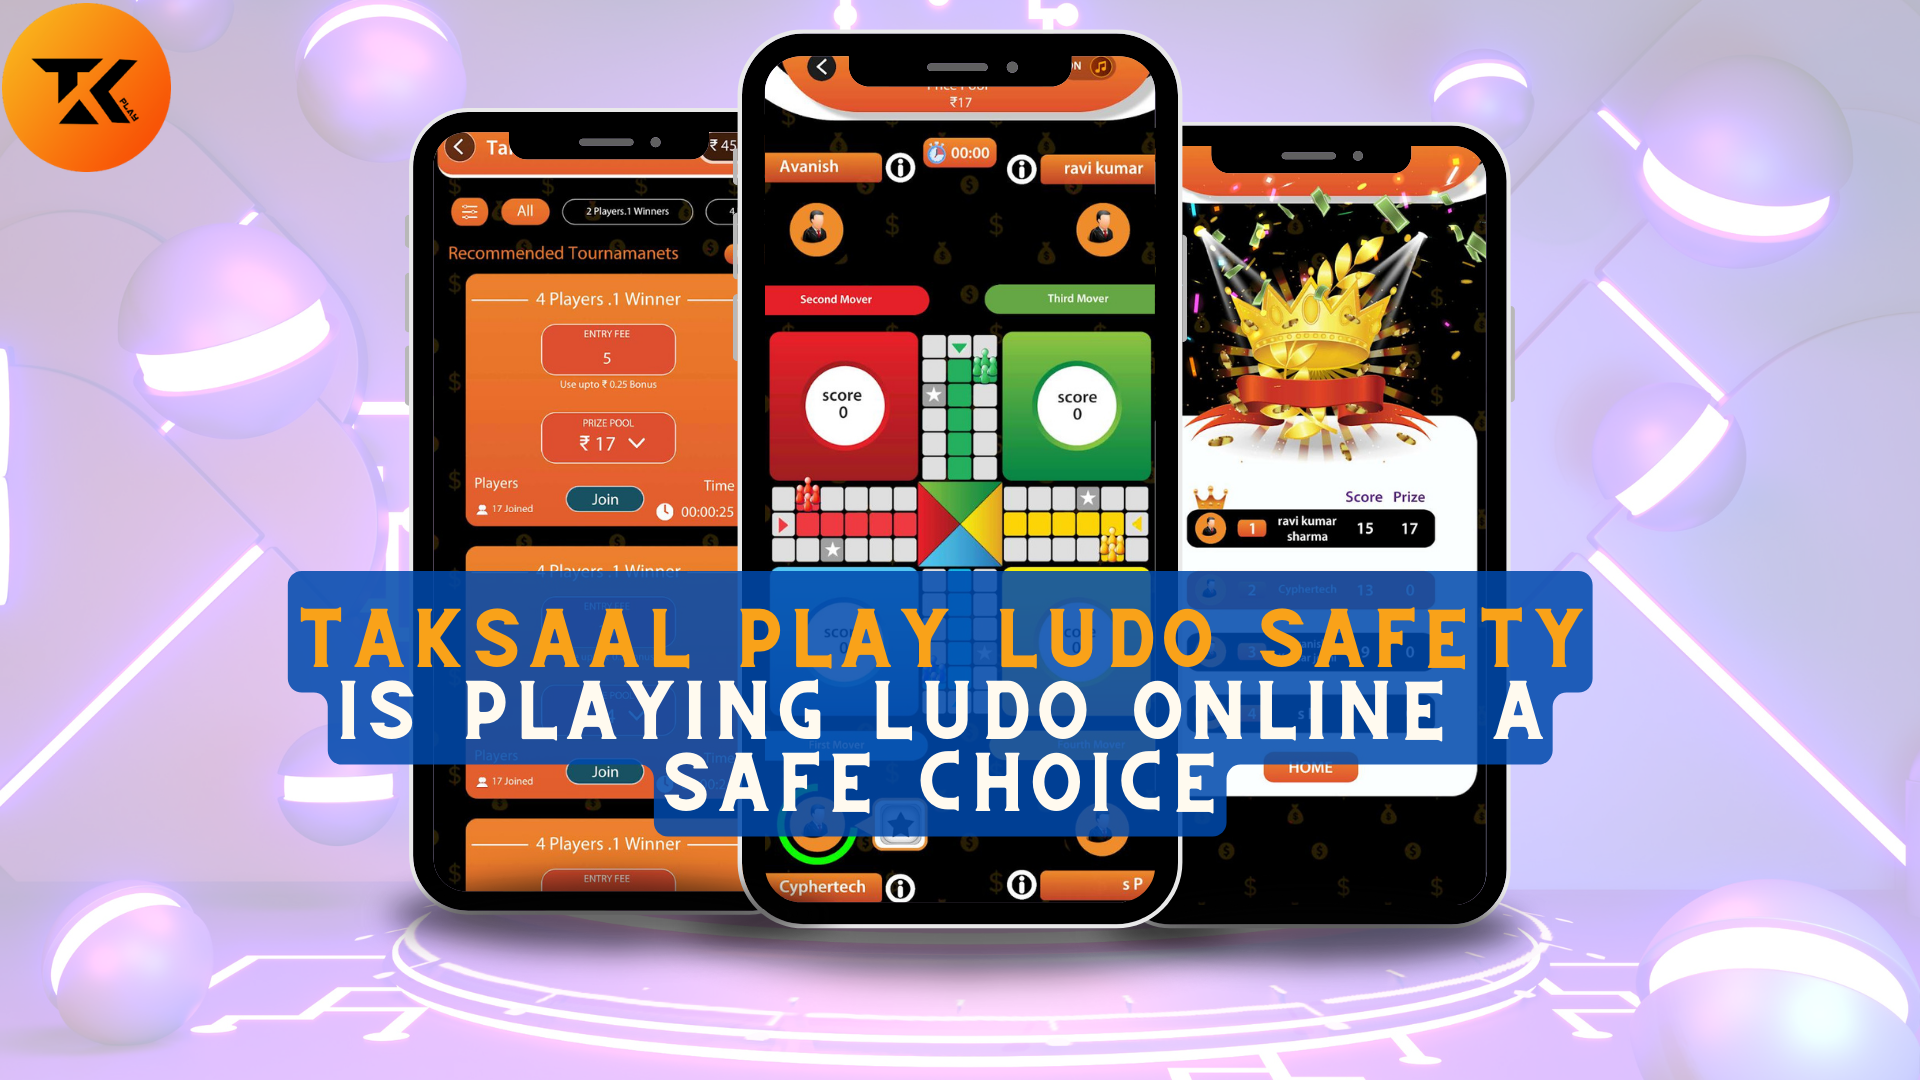 Ludo safety with taksaal play ludo 